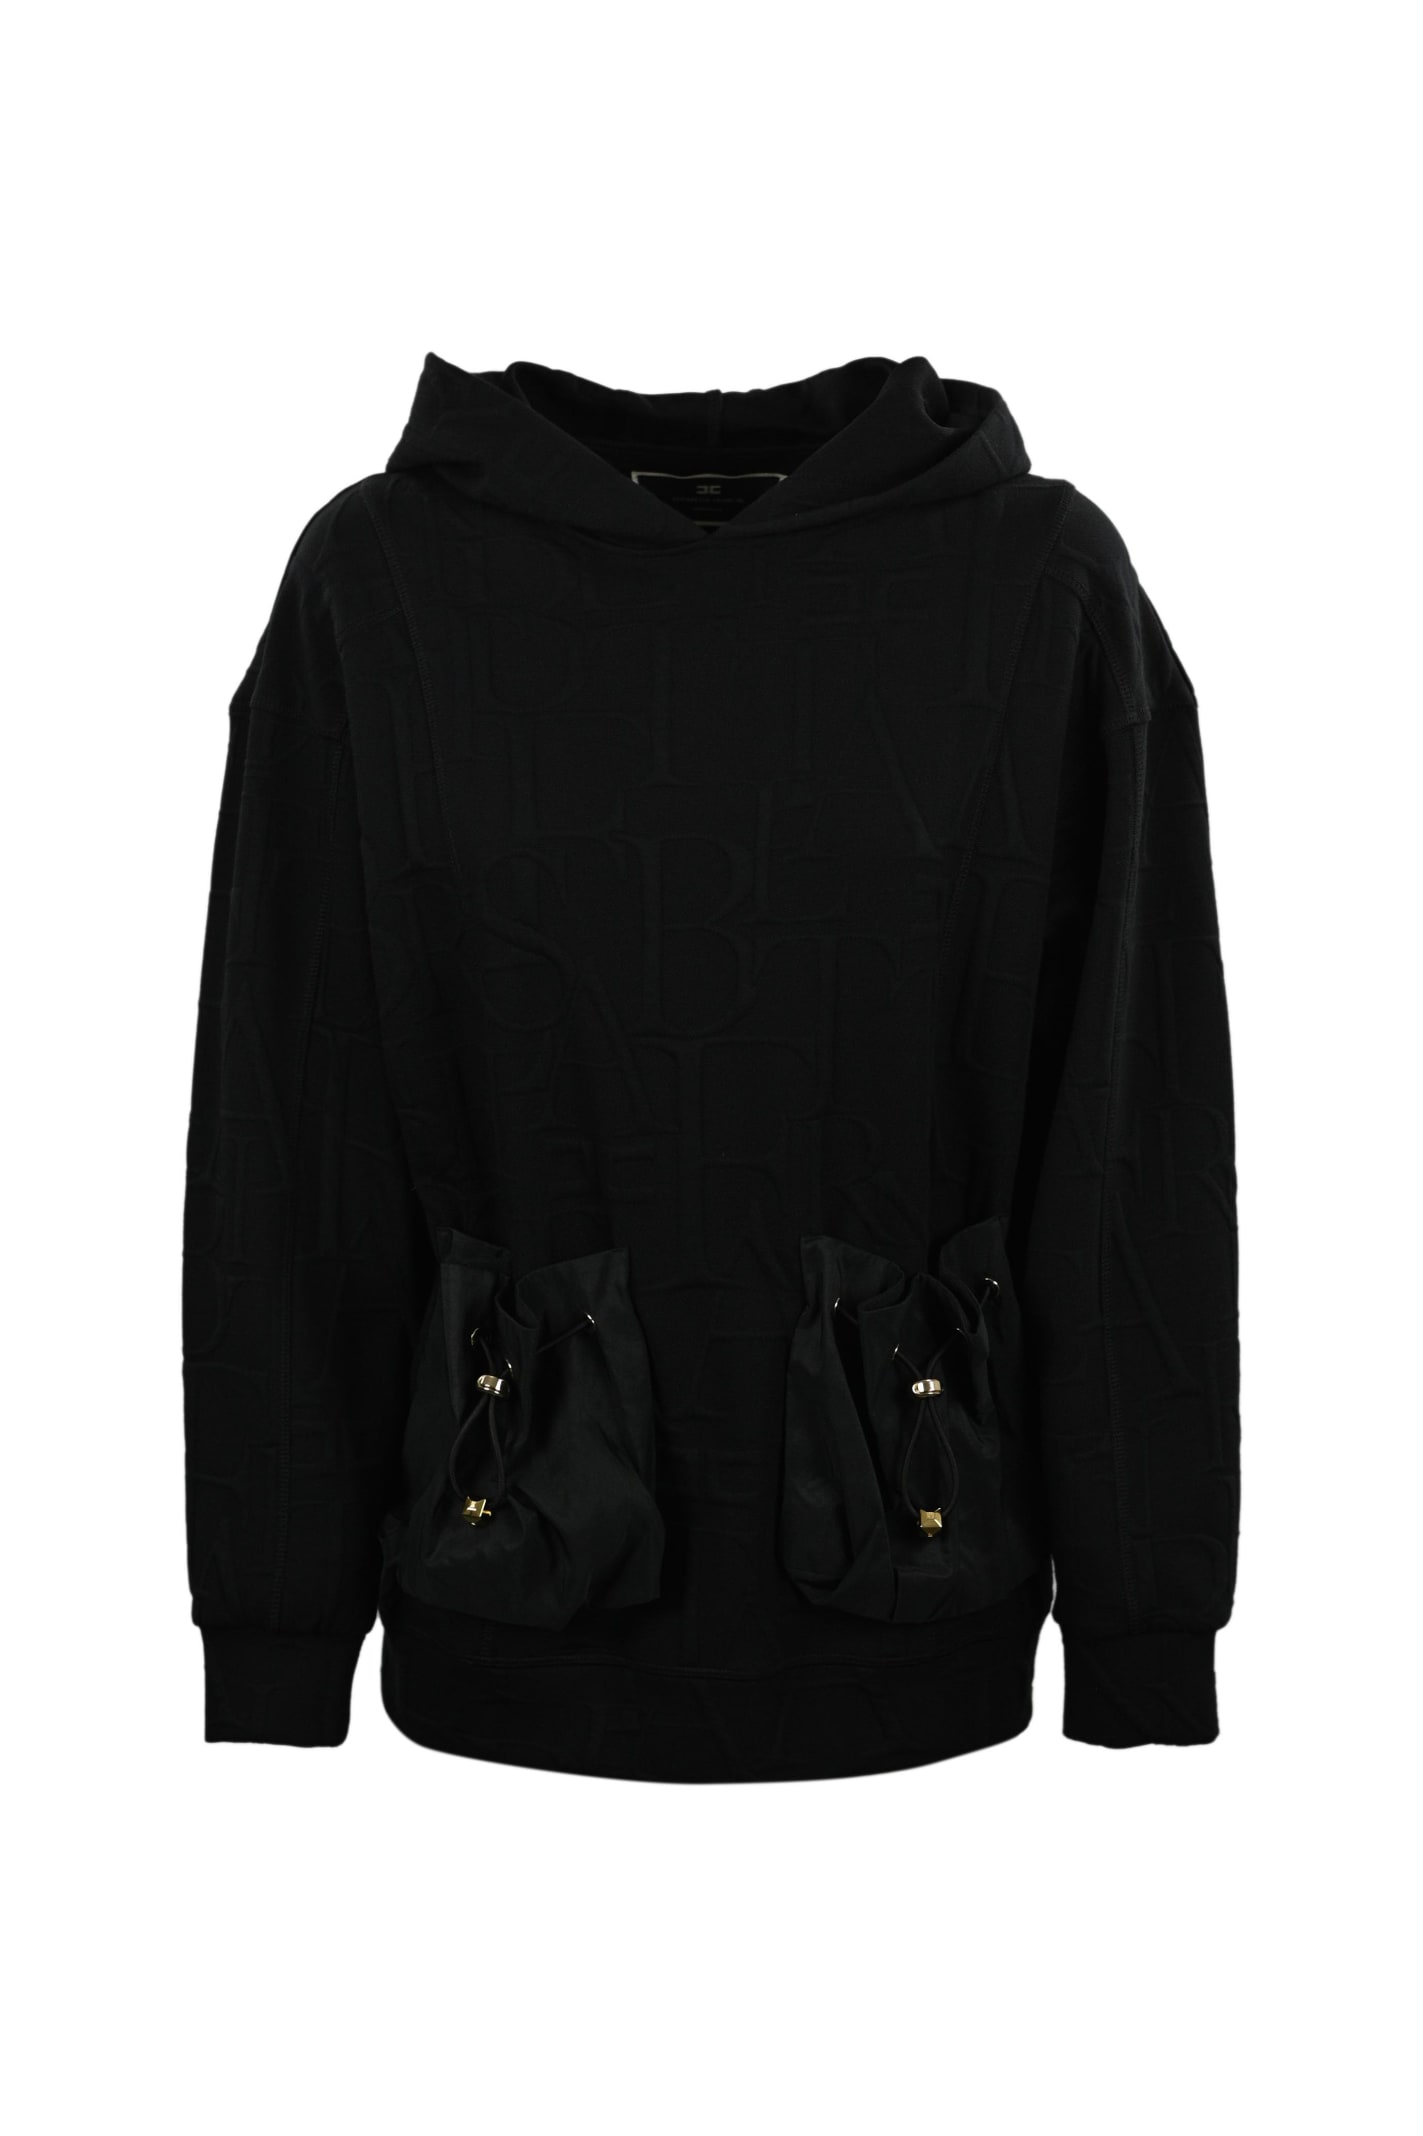 Elisabetta Franchi Hooded Sweatshirt With Lettering Design And Ottoman Pockets